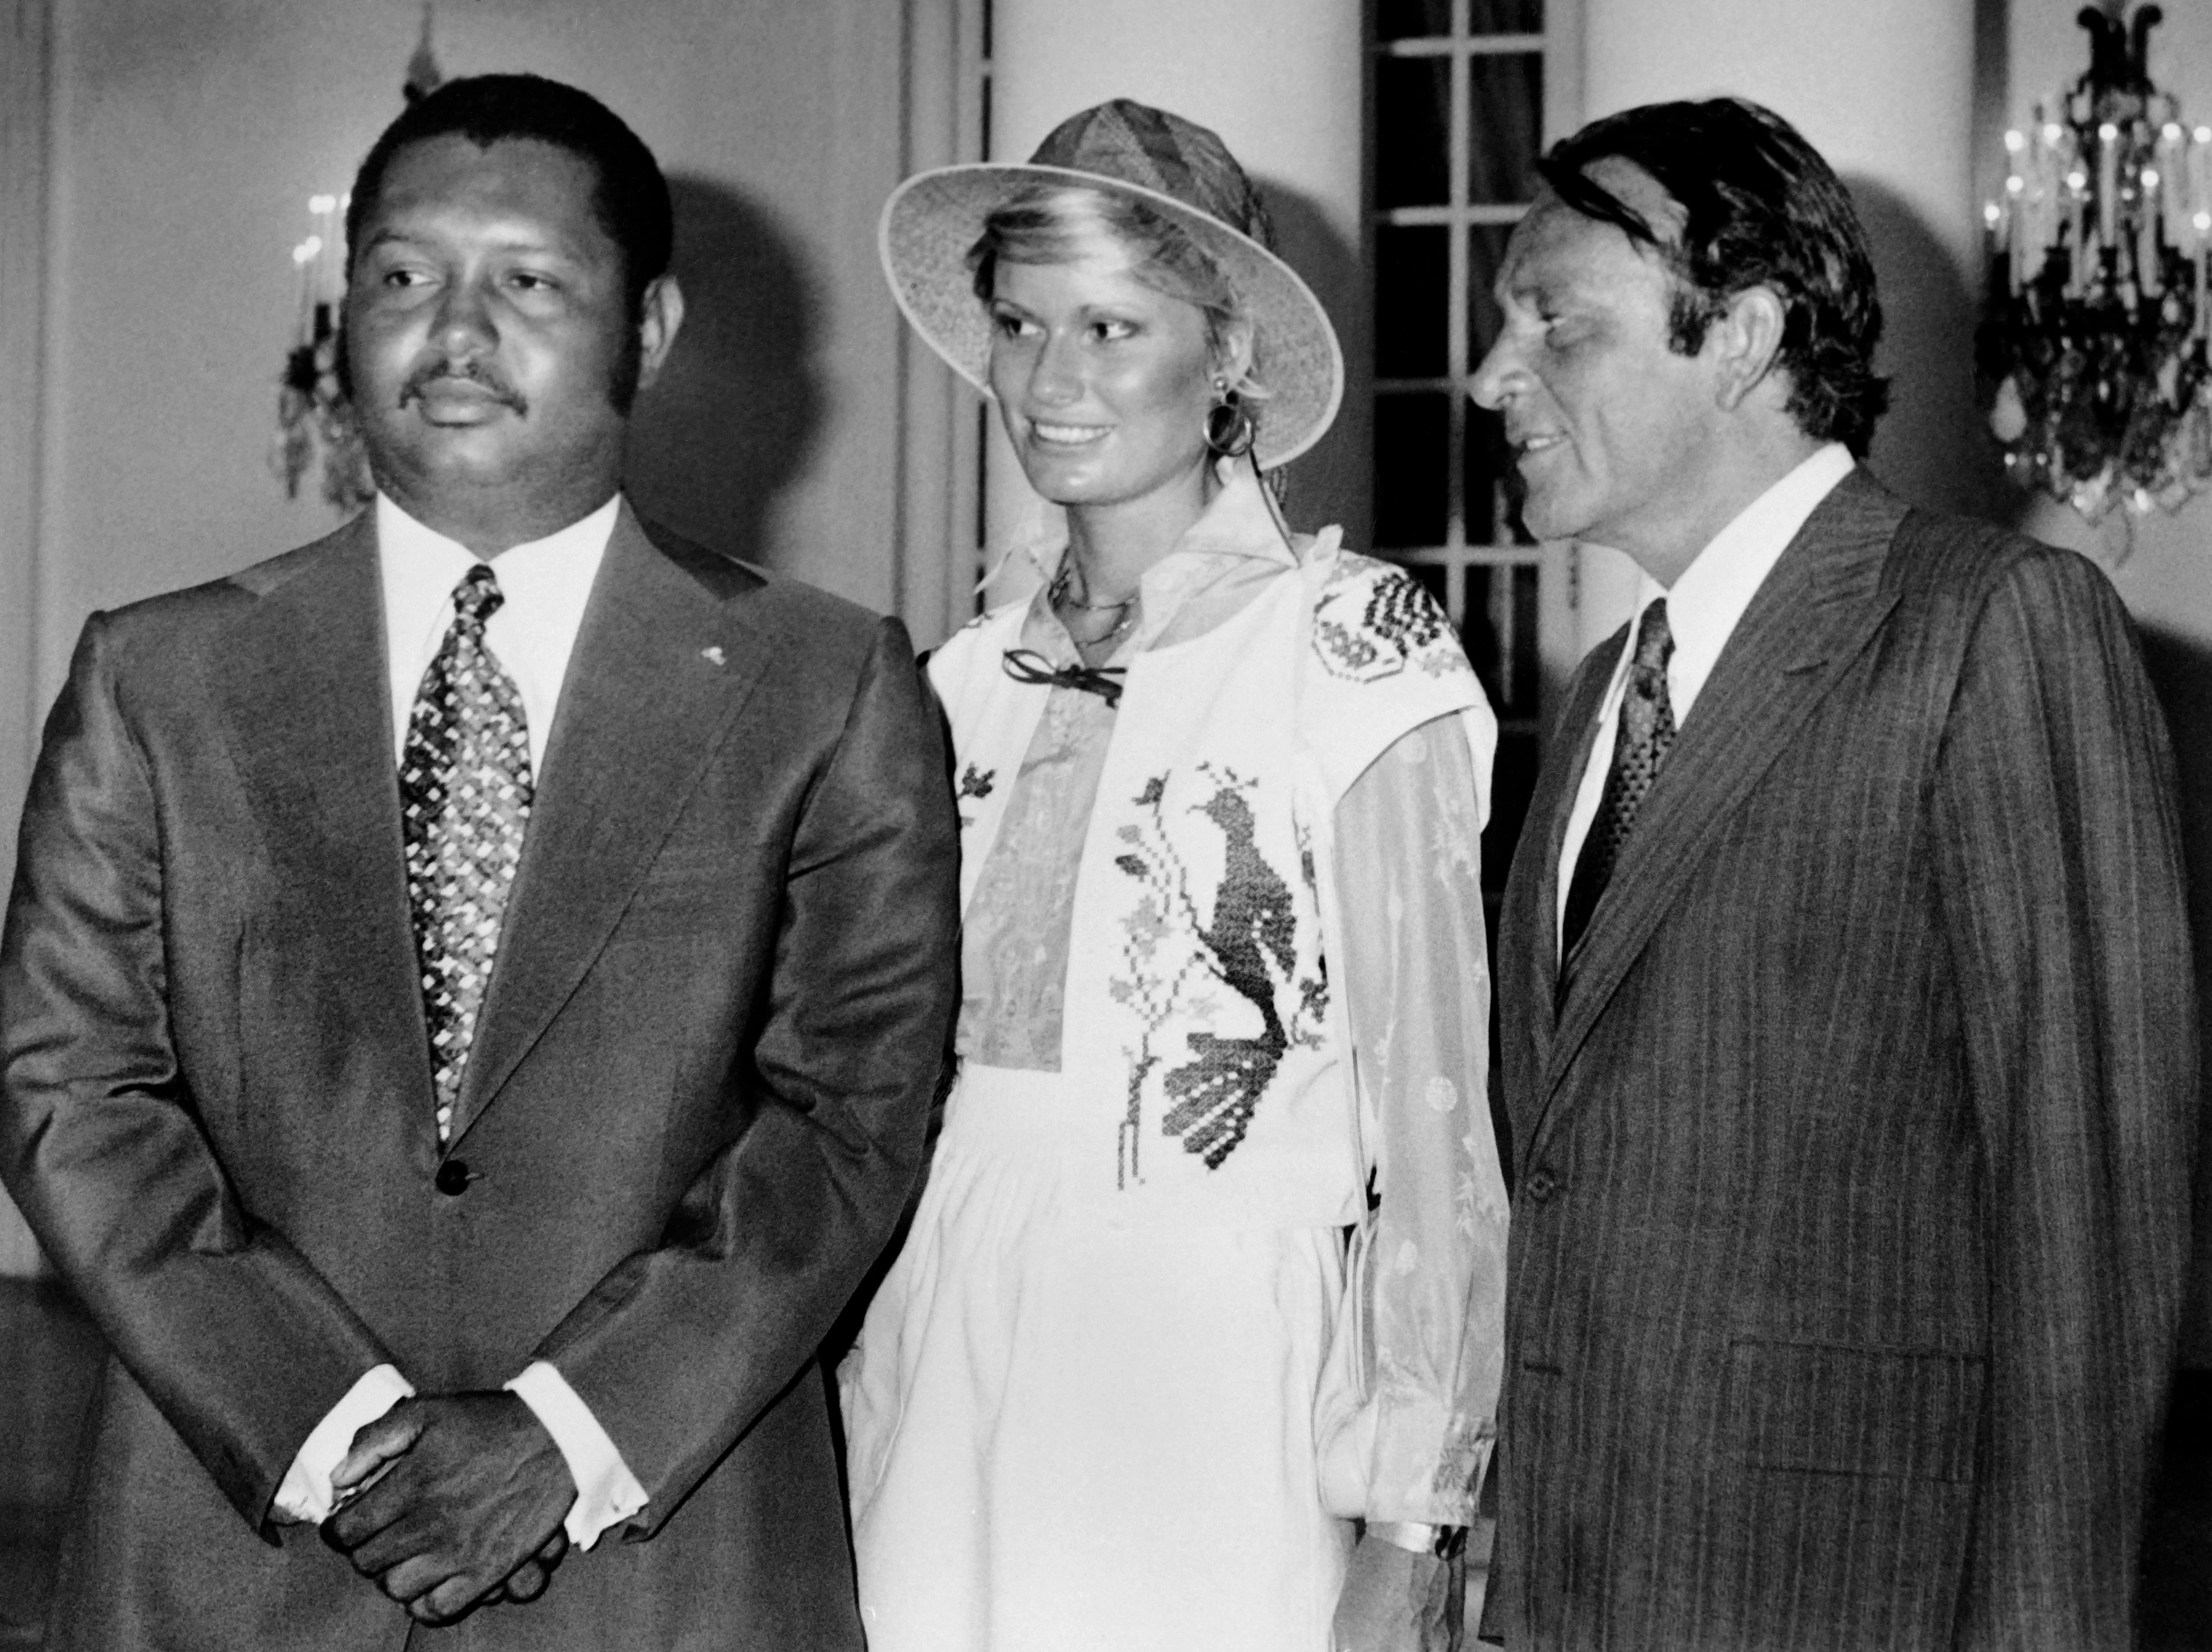 Richard Burton (right) poses with his wife, Suzy Miller, and the president of Haiti, Jean-Claude Duvalier, in 1976